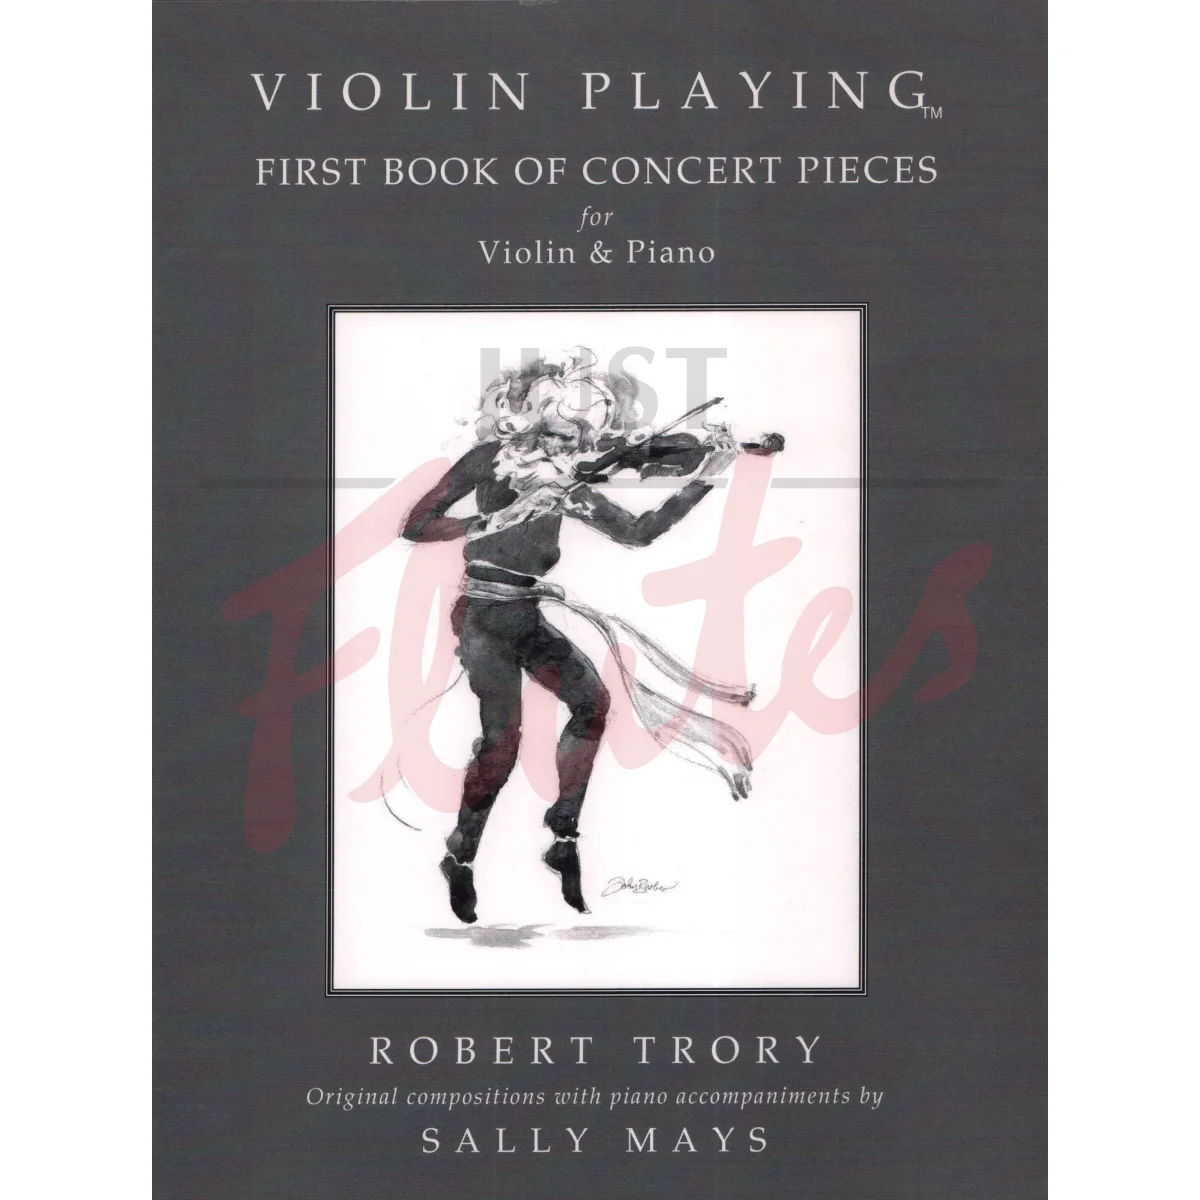 Violin Playing: First Book of Concert Pieces